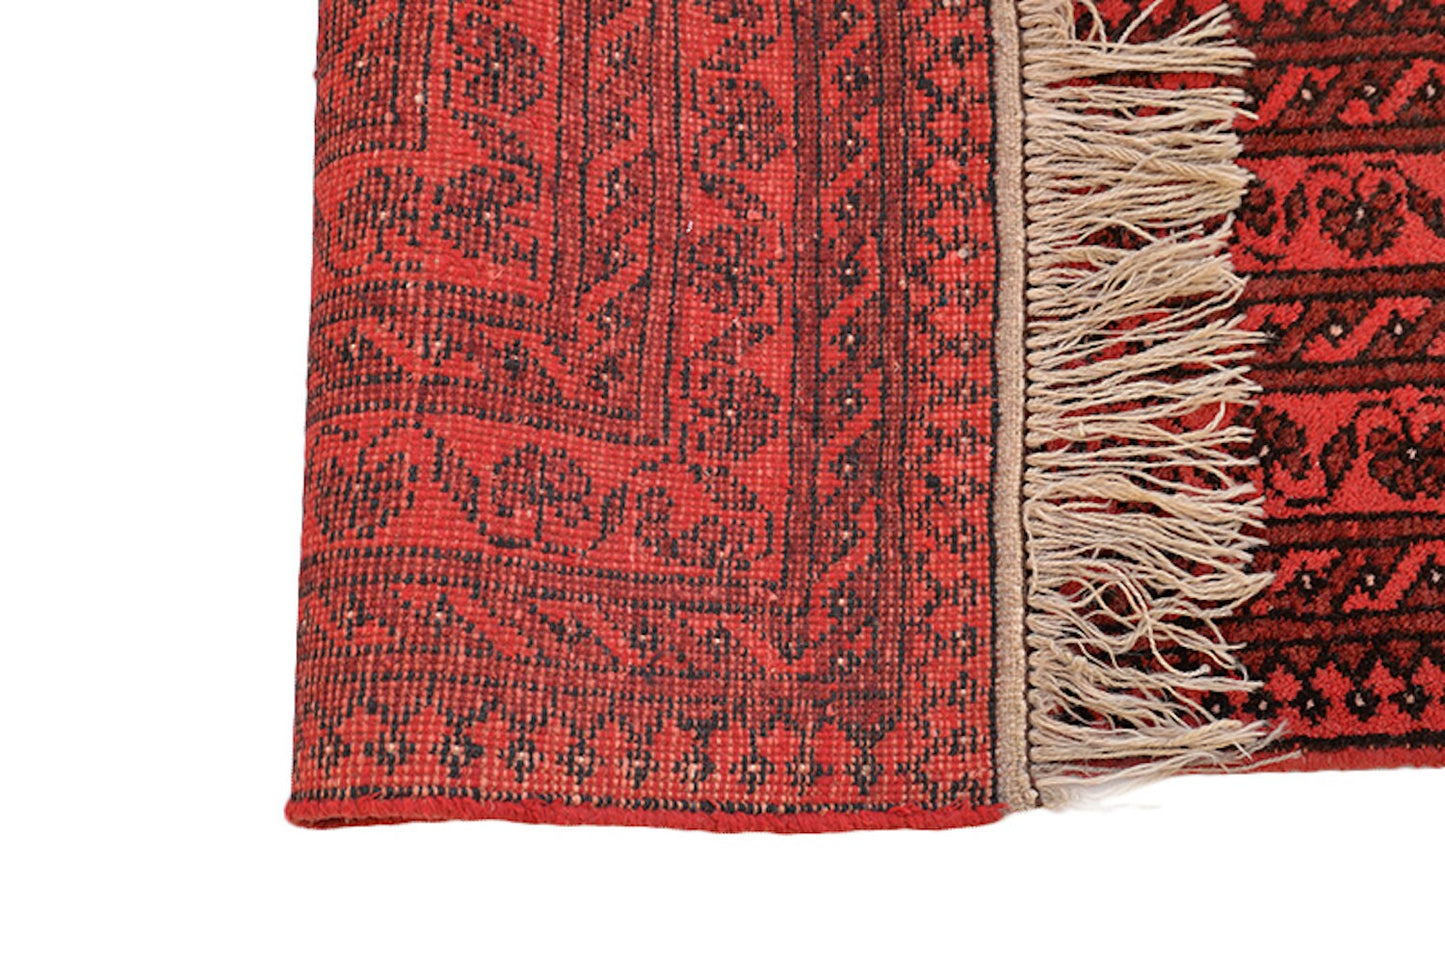 6 x 10 Large Red Oriental Area Rug with Thick Dark Red Border, Repetitive Tribal Pattern, Soft Wool Hand Knotted Rug